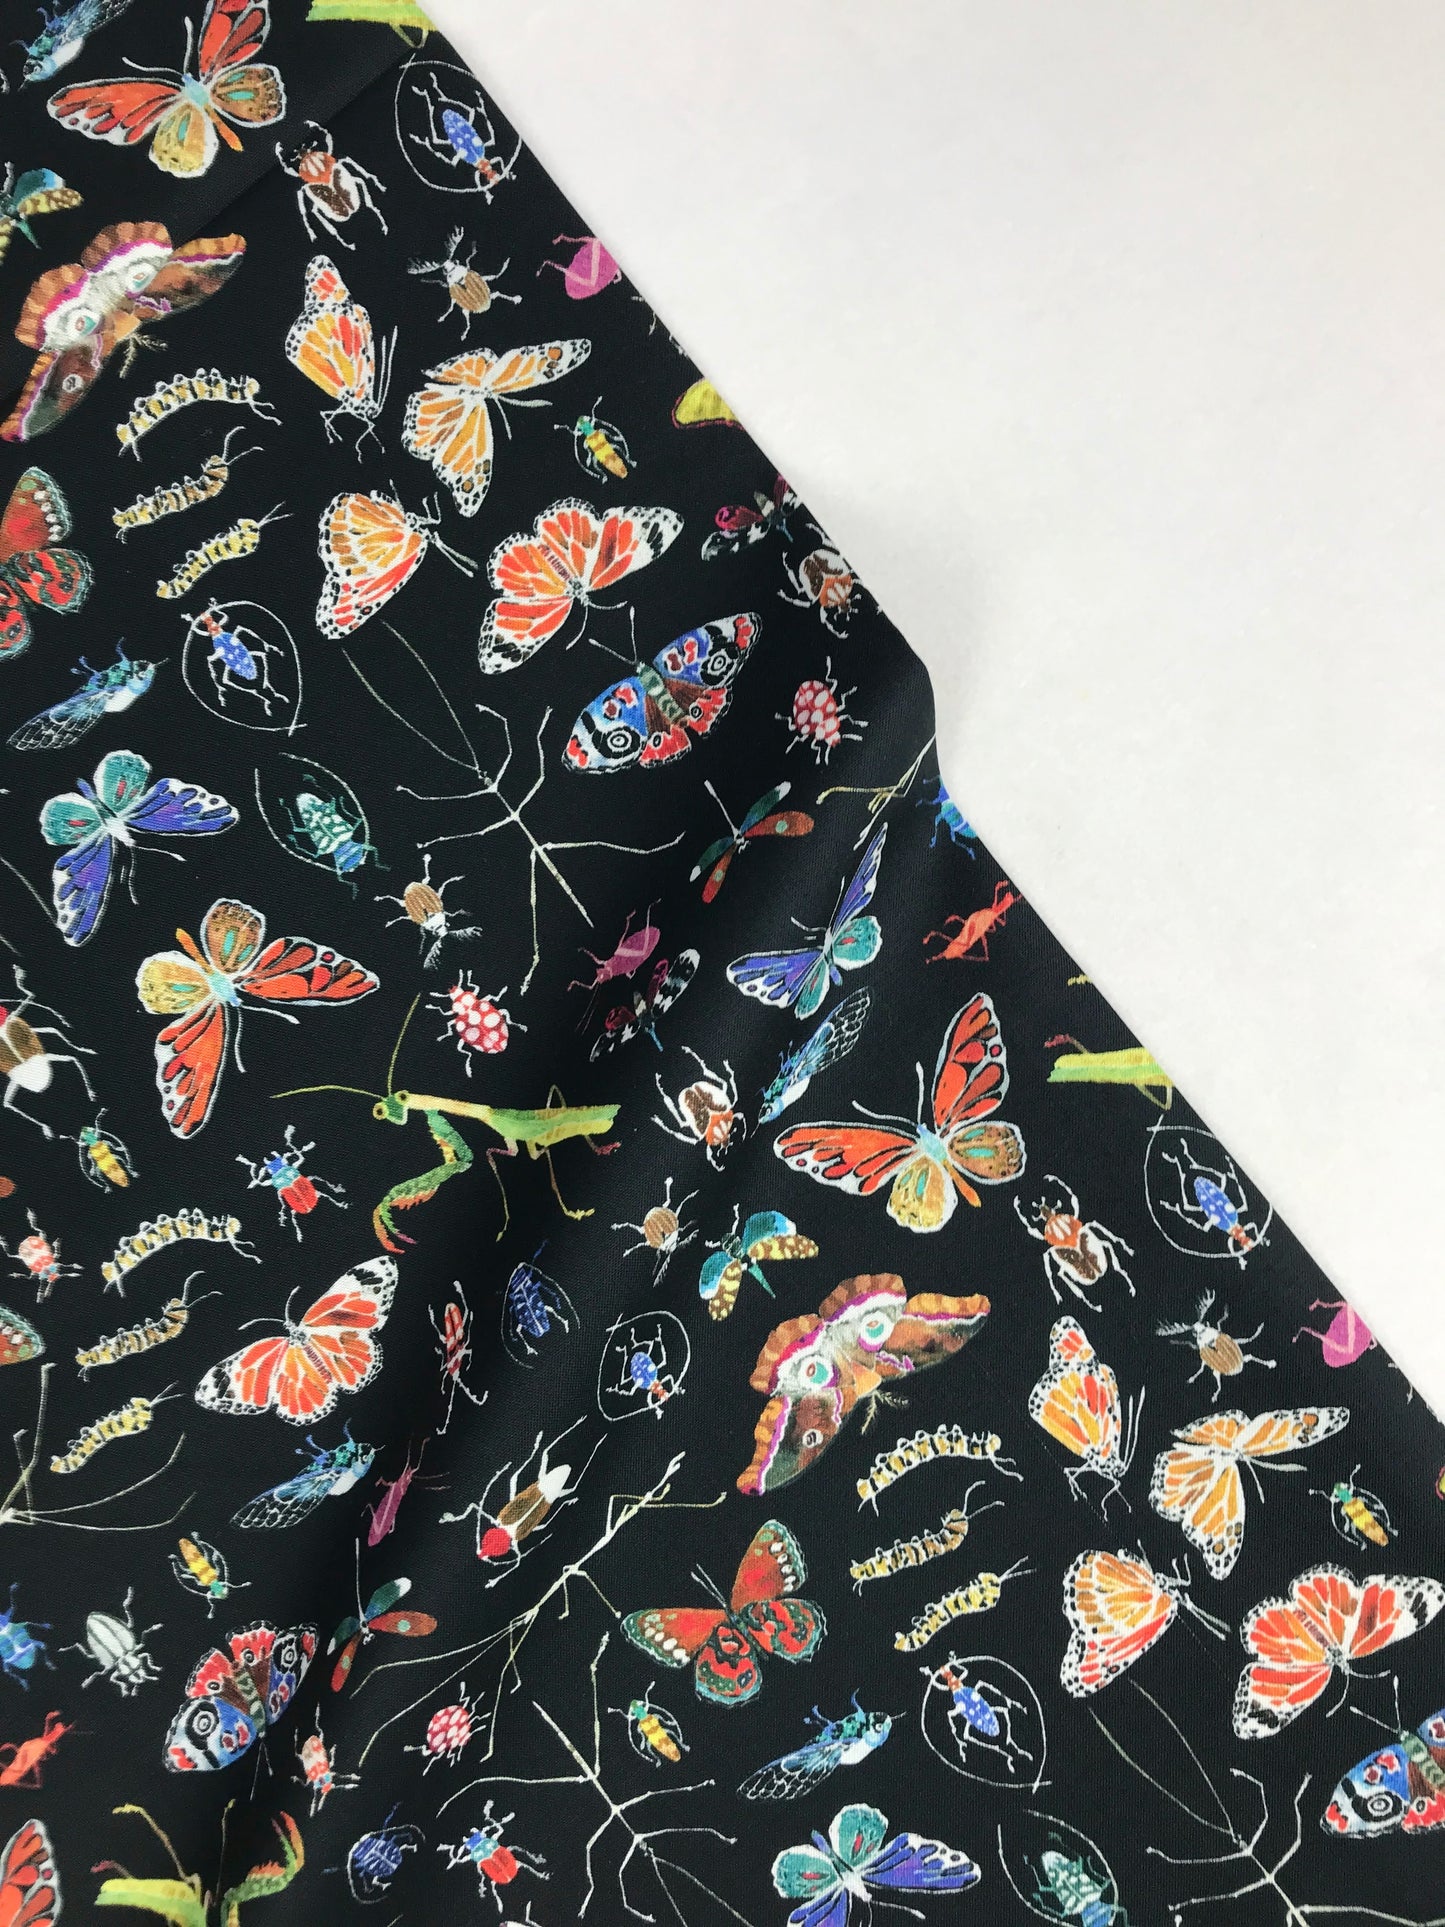 windham fabric beth olmsted deep forest insects black quilters cotton Fabric Fetish